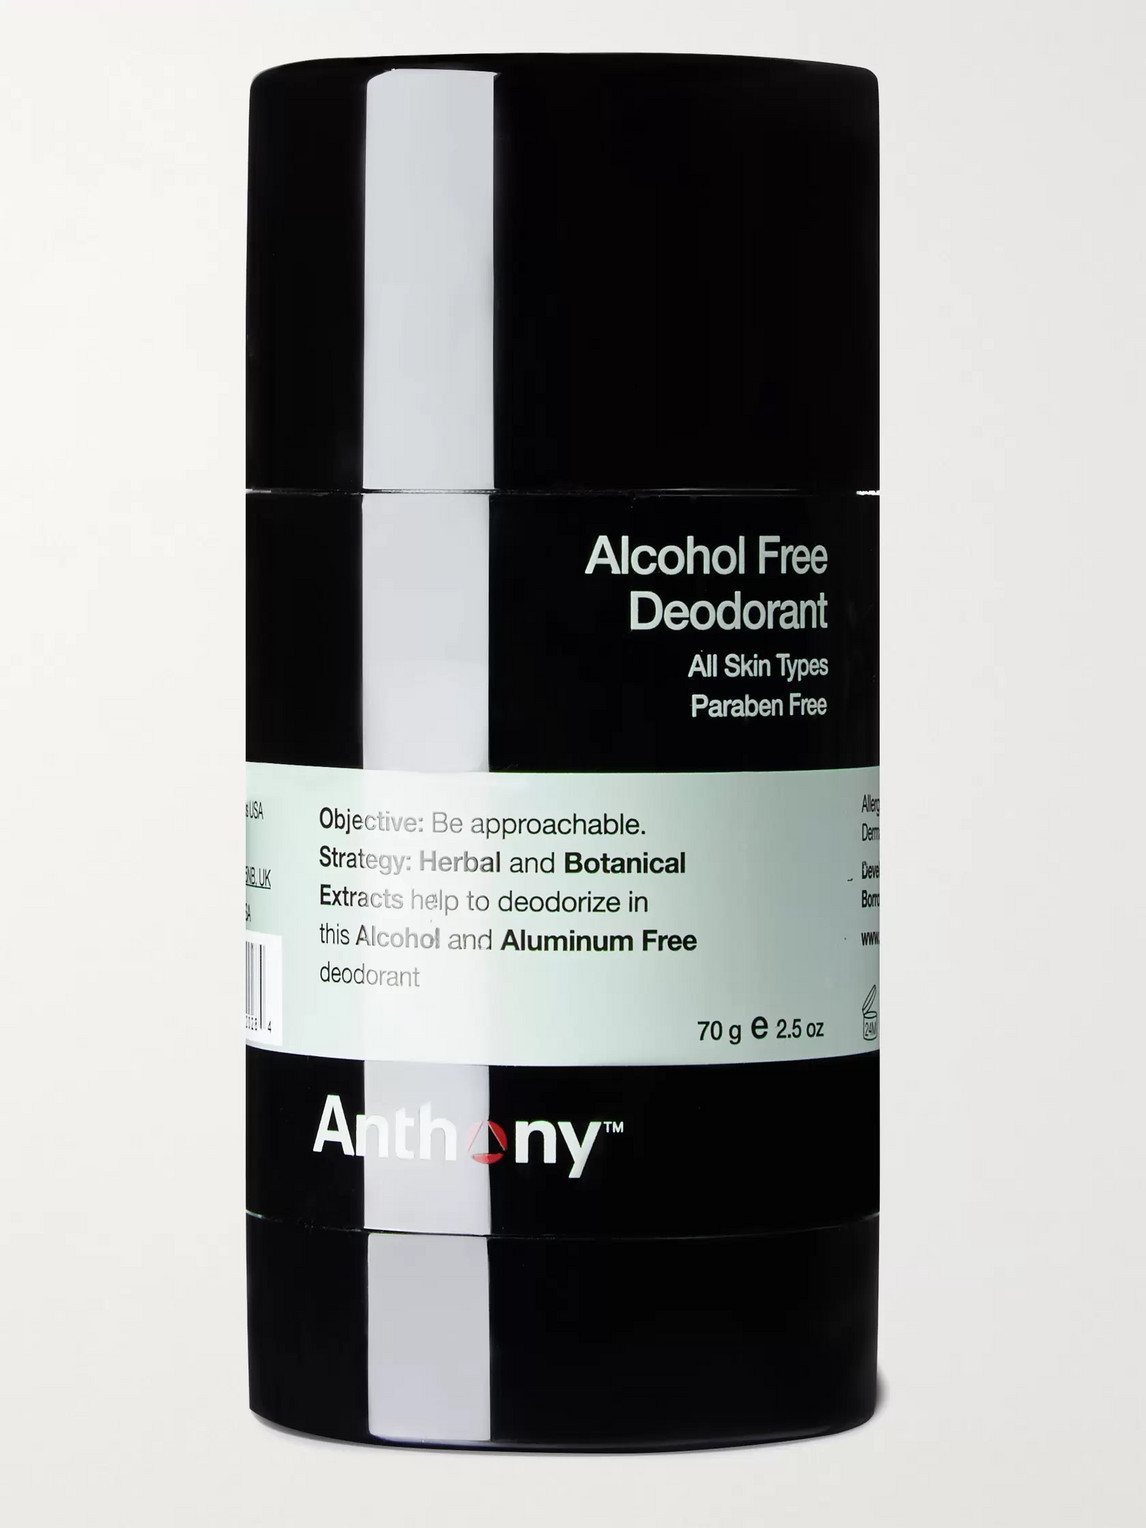 Anthony Alcohol Free Deodorant, 70g In Colorless